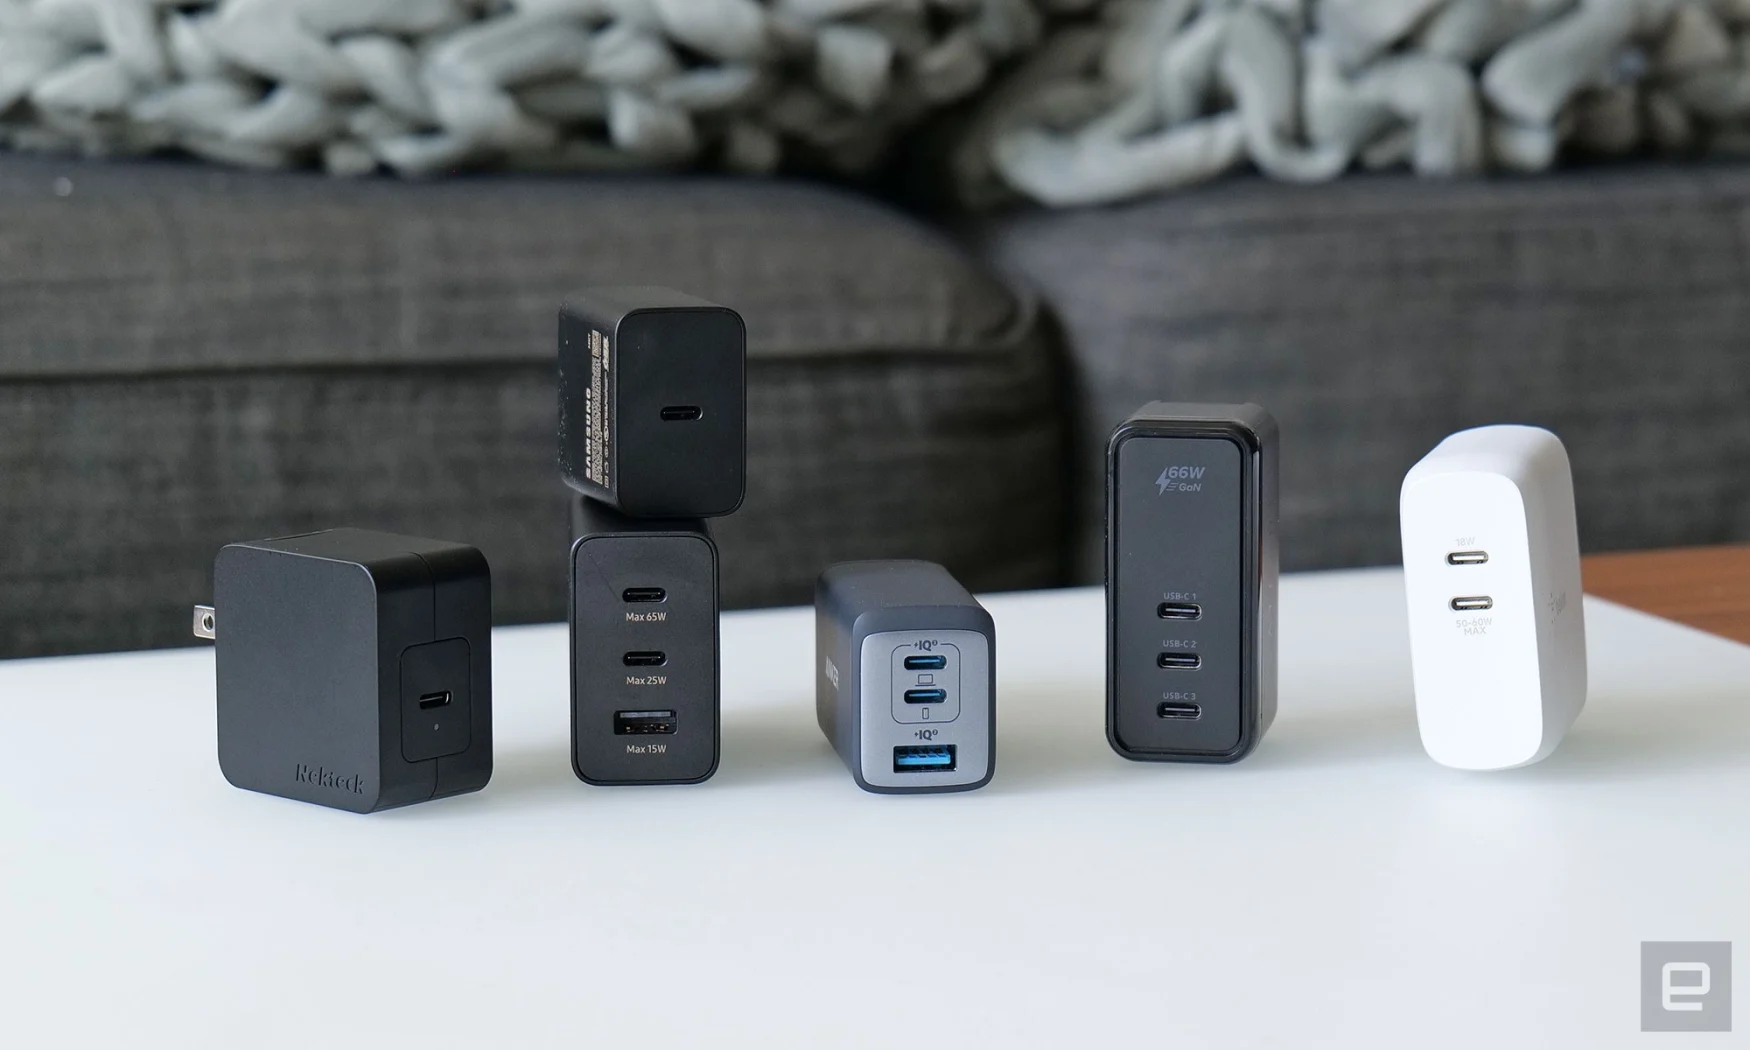 Anker once again takes the crown for our favorite 60-watt charger with the 715 (middle), because even though it's a bit more expensive than the Nekteck, it's smaller, has more ports, and features wider compatibility with more devices like the S22 Ultra.